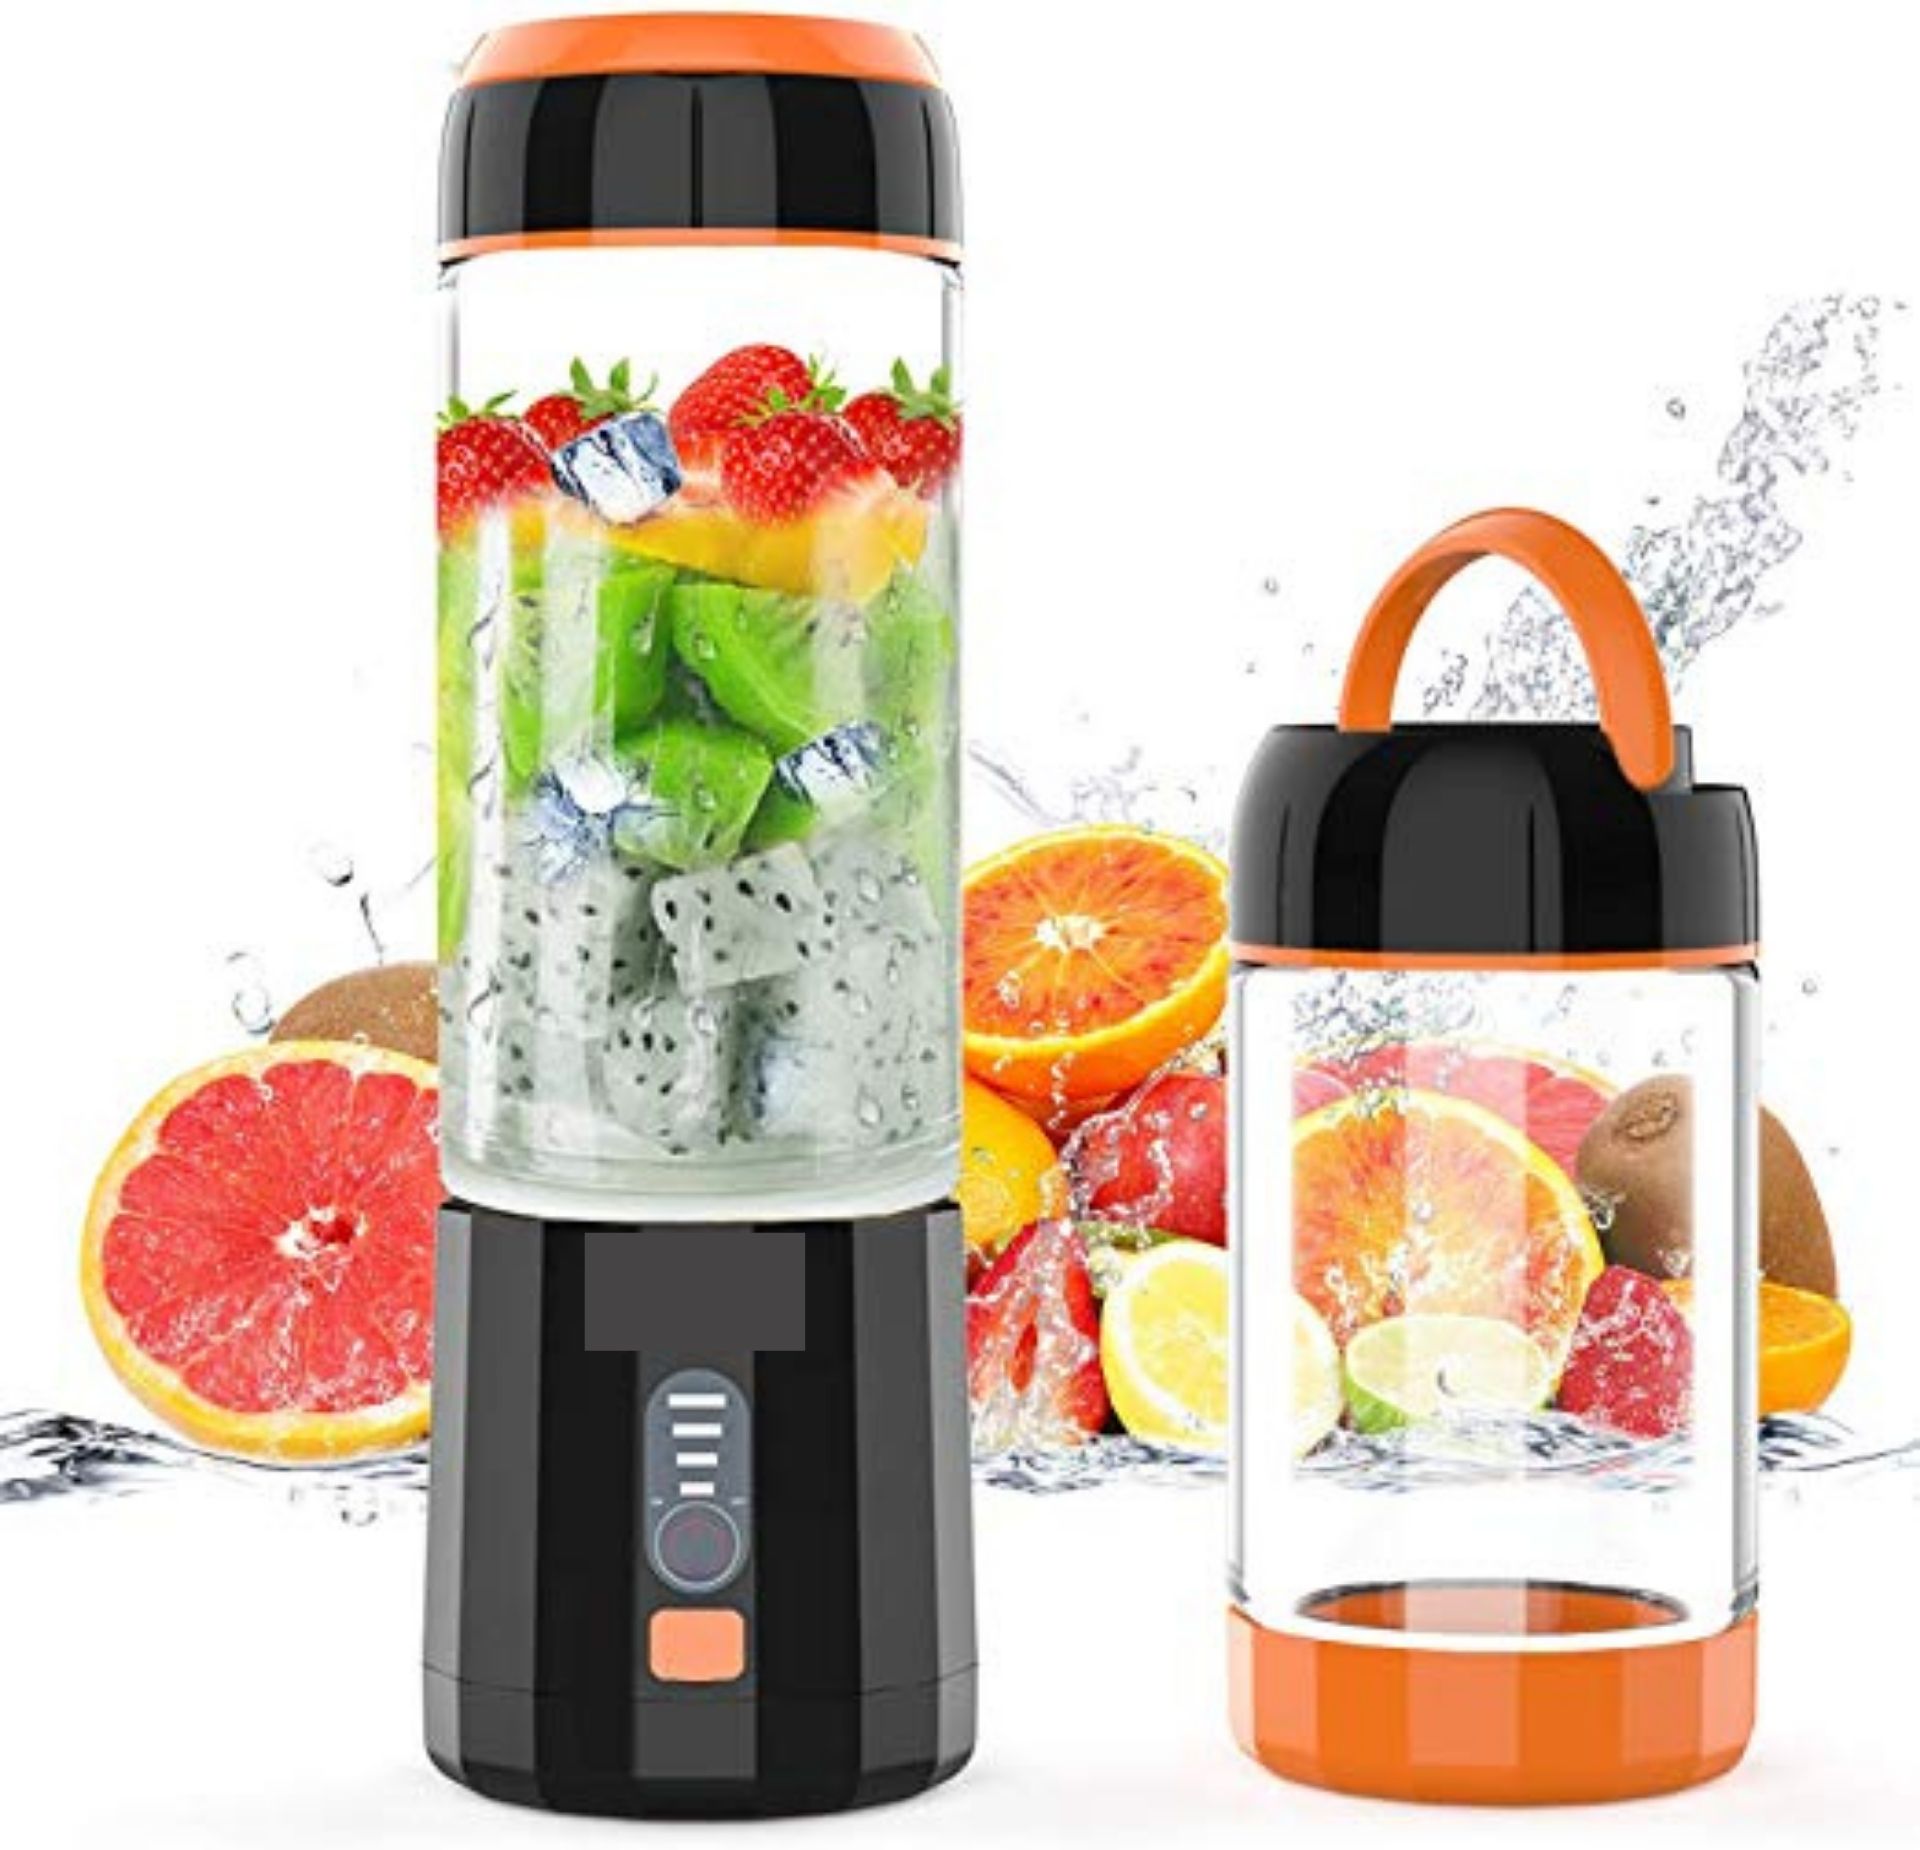 G-Ting Portable Blender Review (2021): Is it Worth Buying? Answered